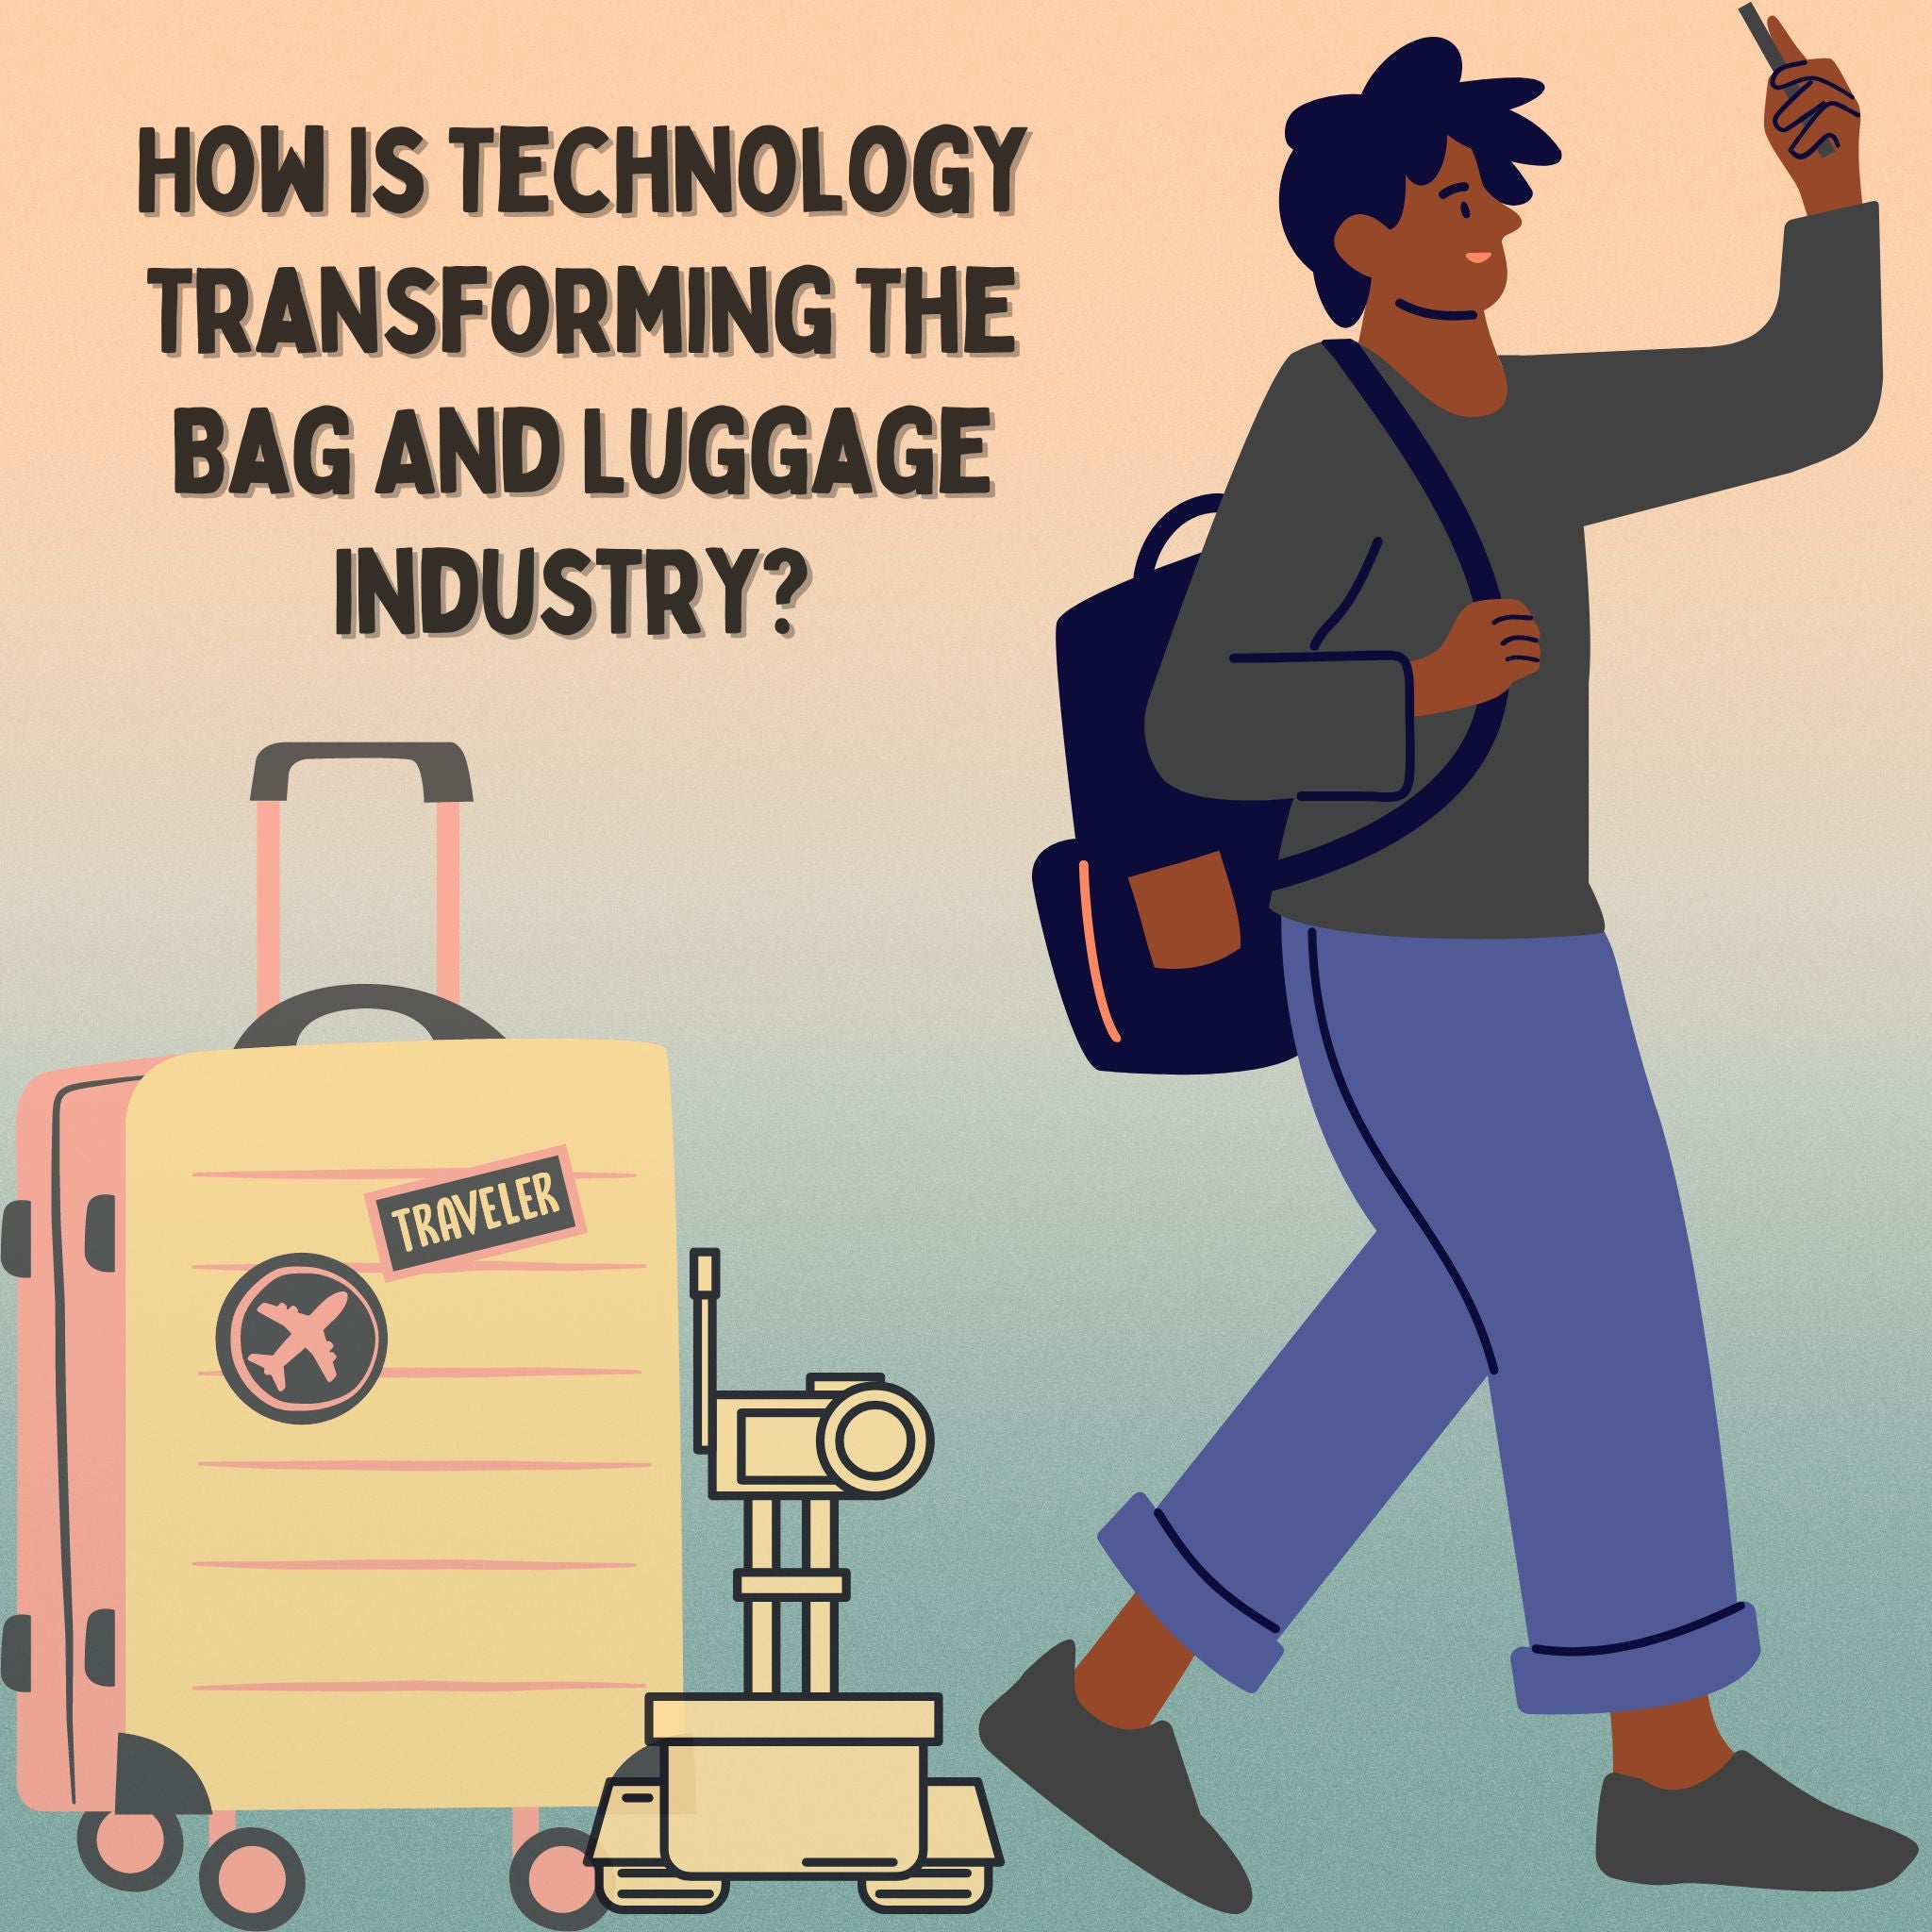 How Is Technology Transforming The Bag And Luggage Industry?